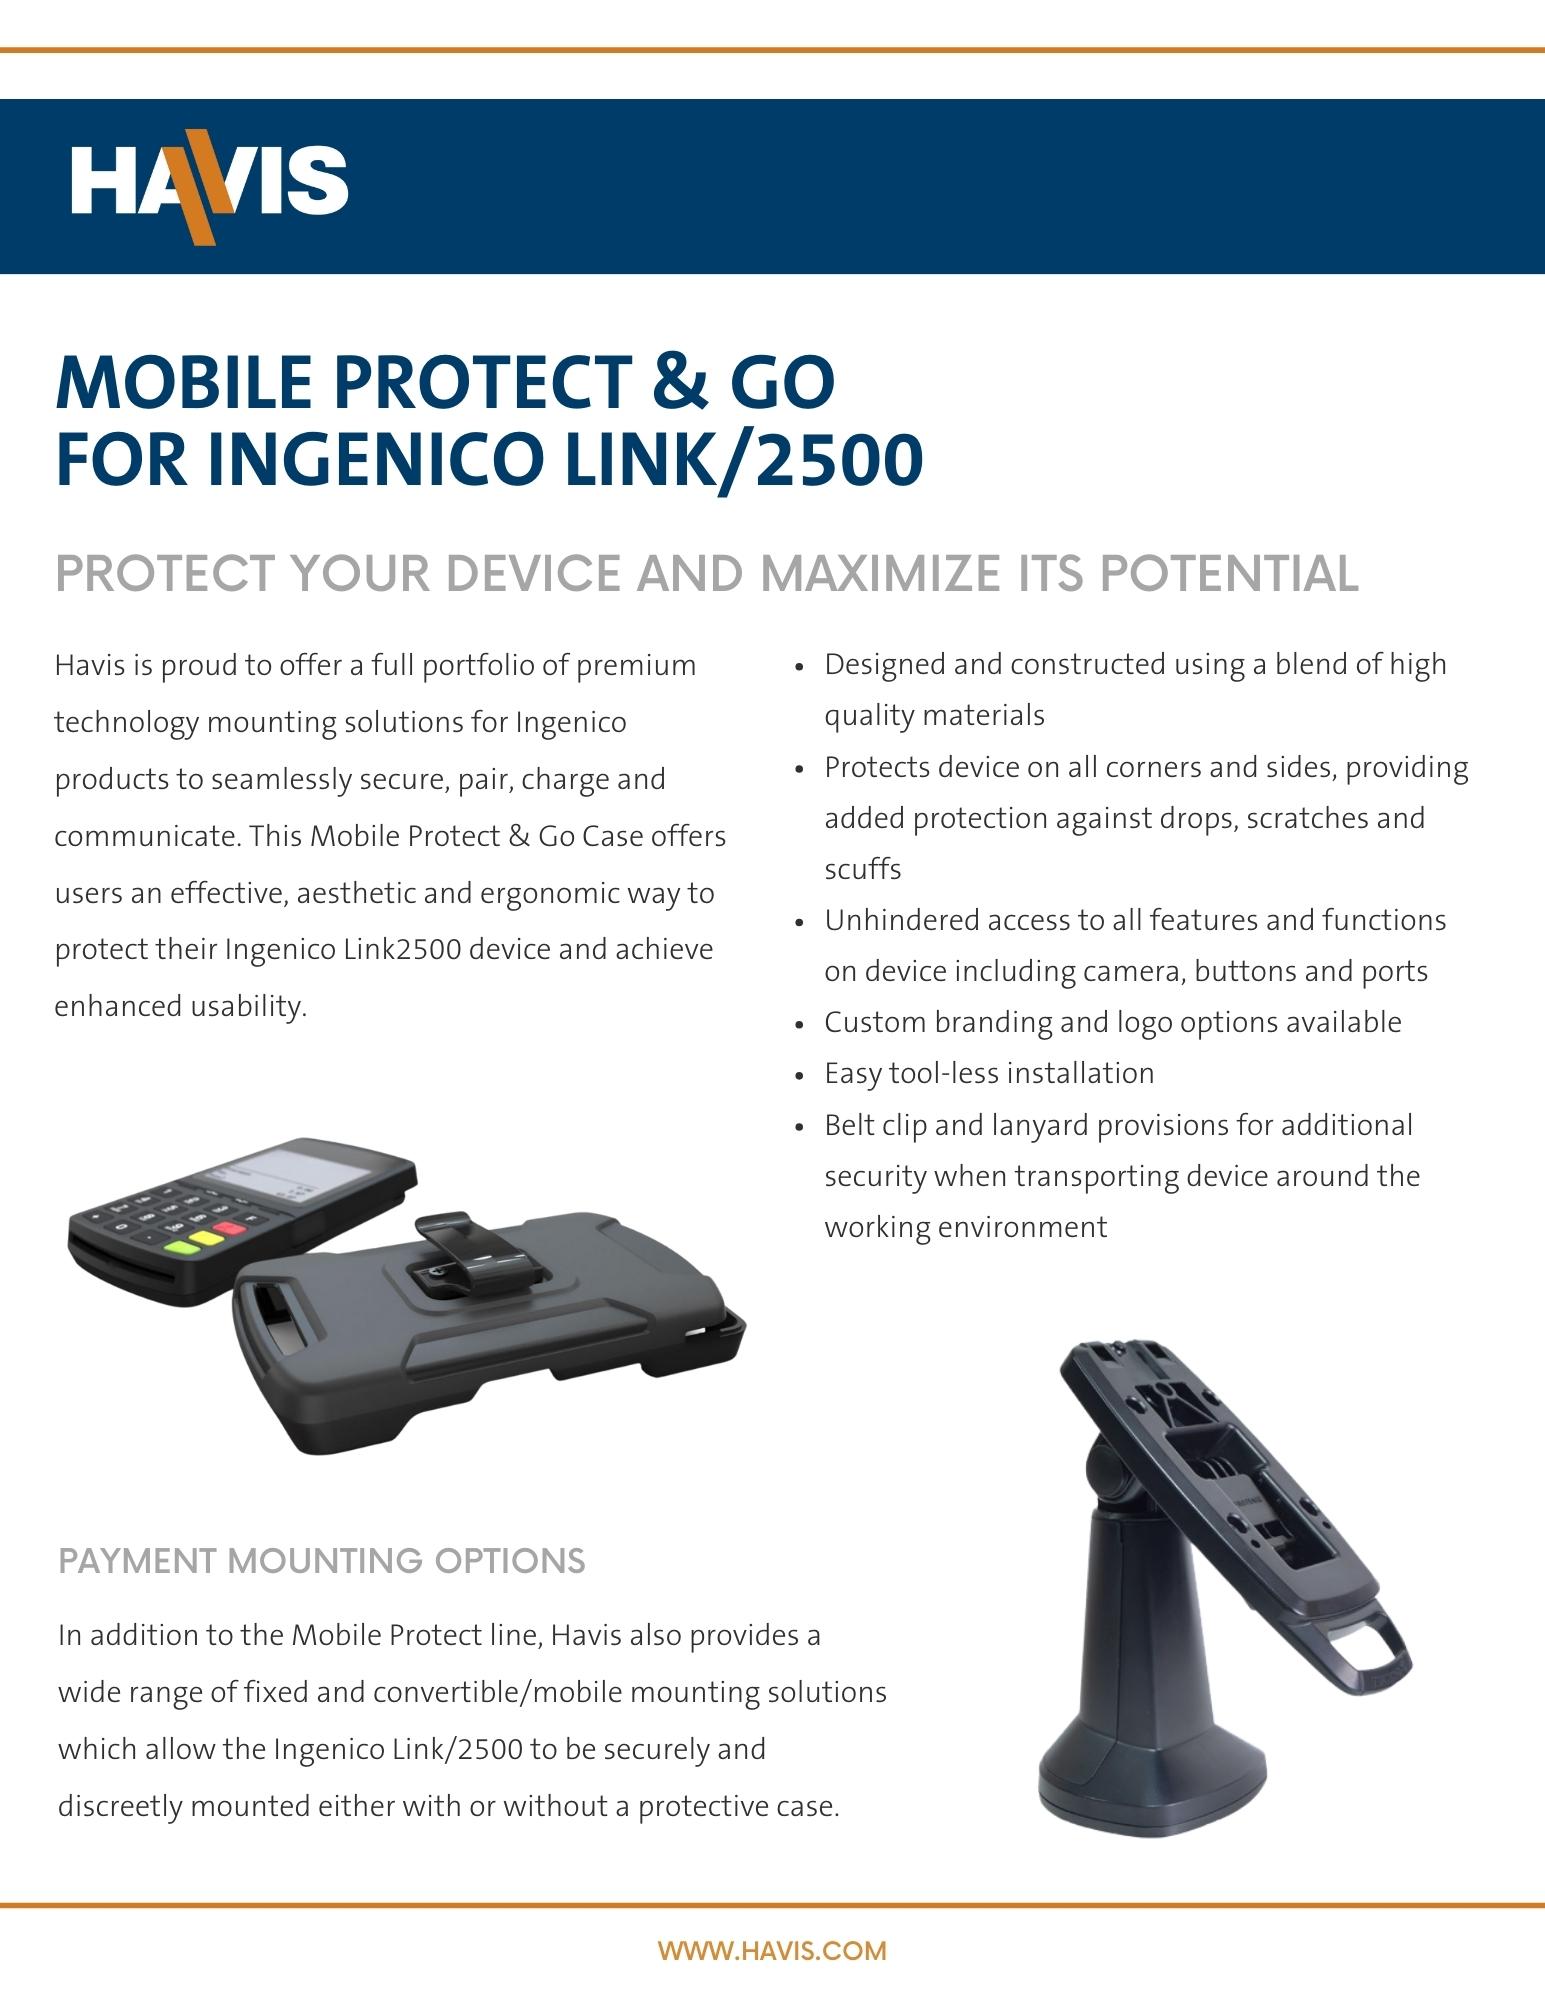 Mobile Protect & Go for Ingenico Link2500 - Data Sheet